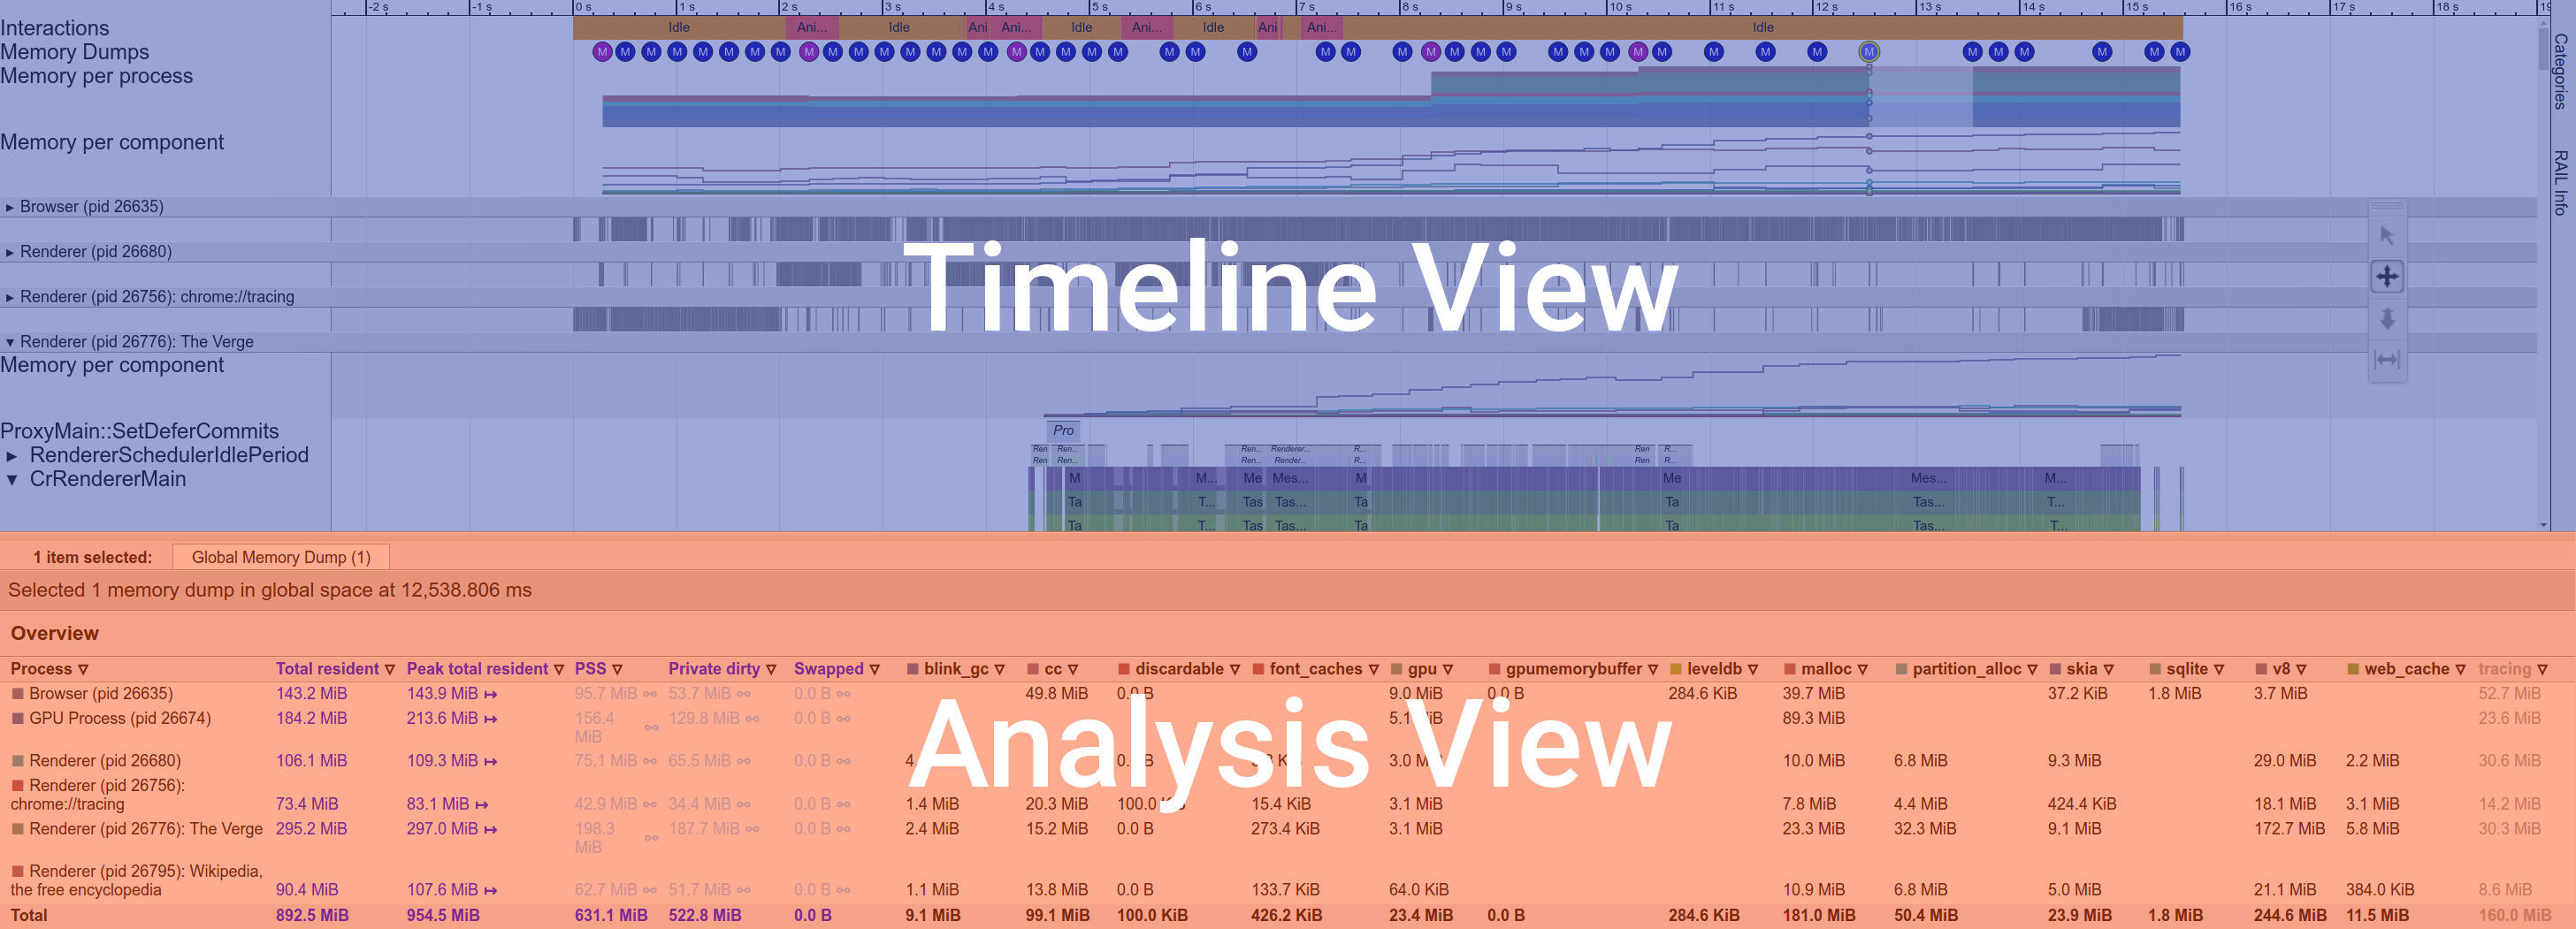 Timeline View and Analysis View